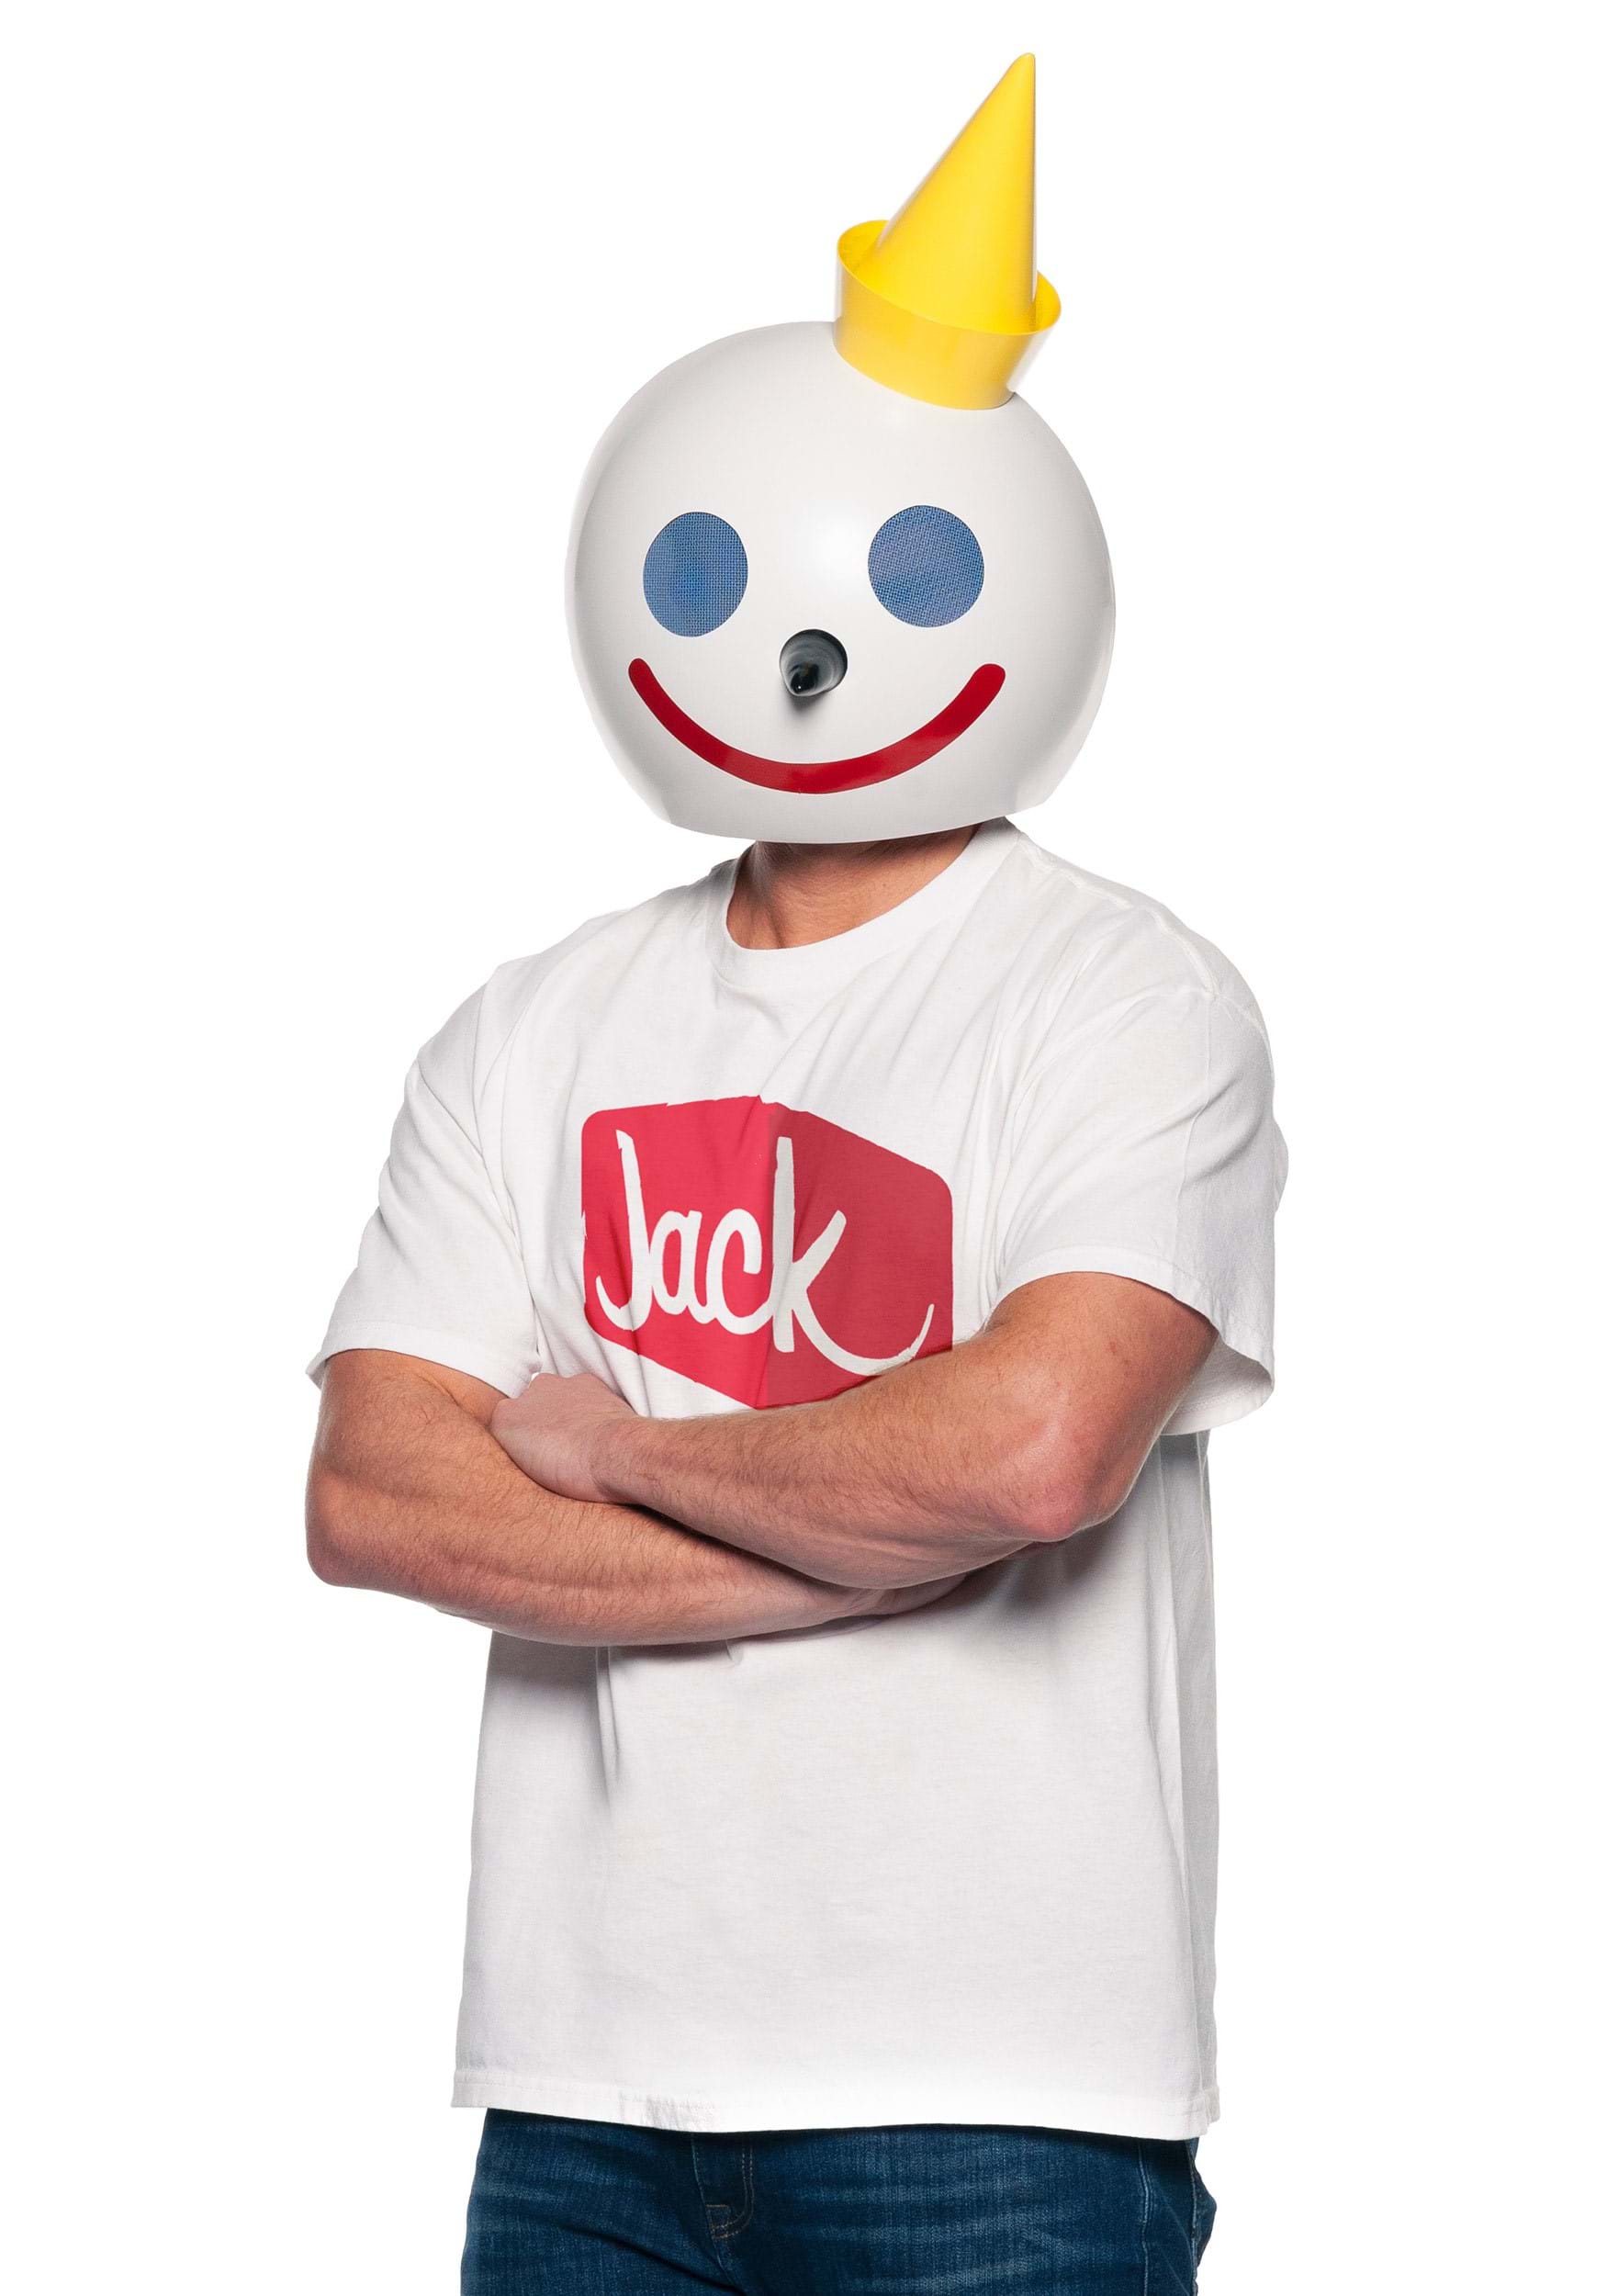 Jack from Jack-in-the-Box Costume!